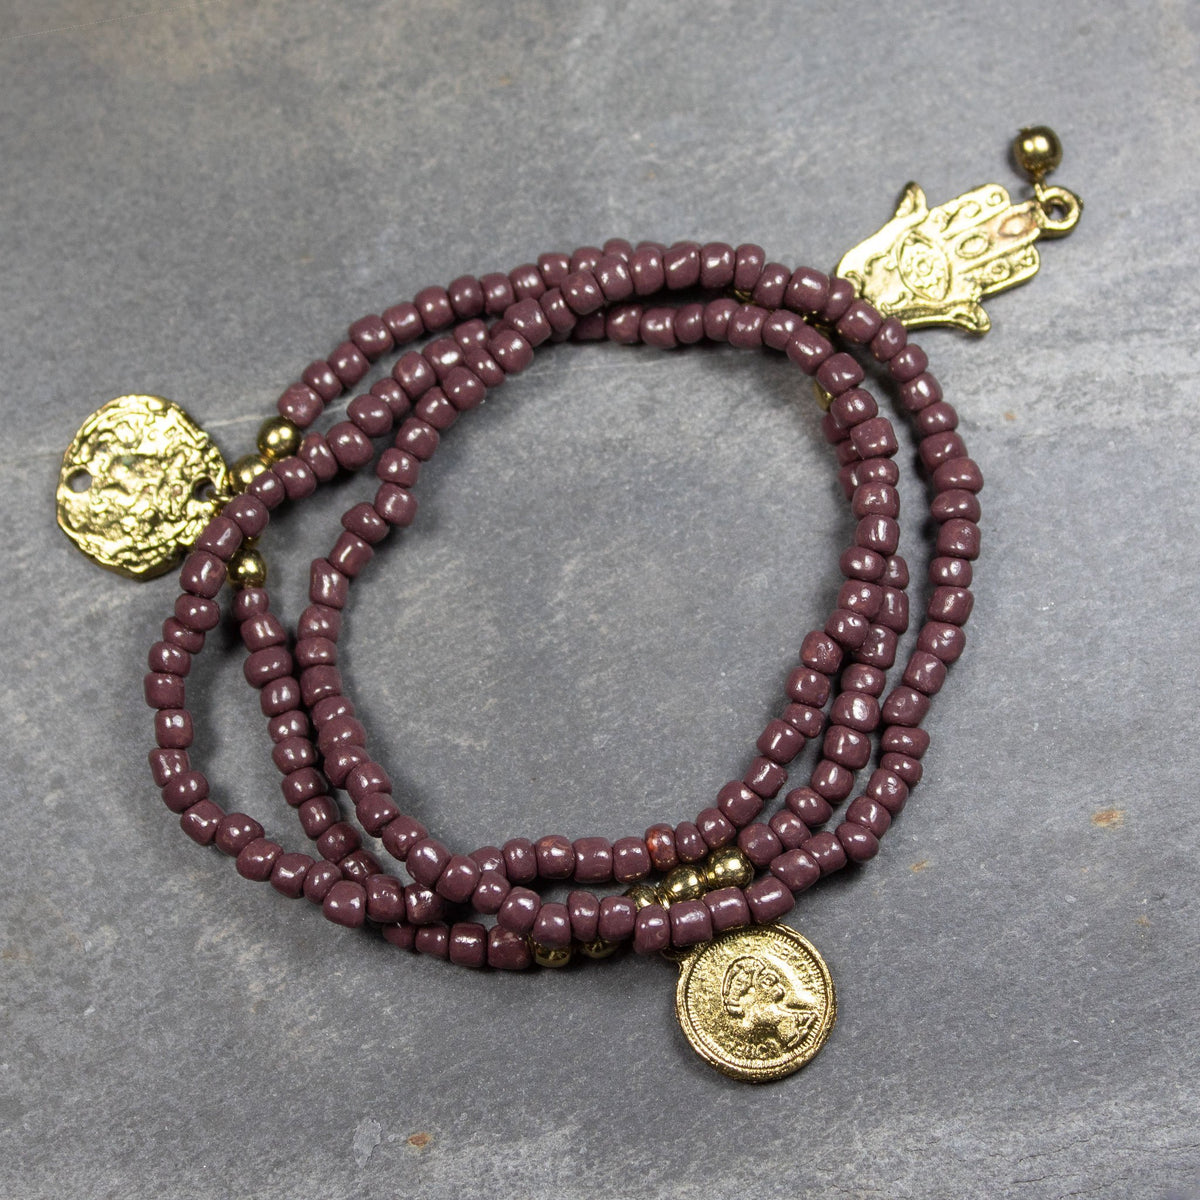 Brown Bead Bracelets With Gold Charms | Bracelet - The Naughty Shrew